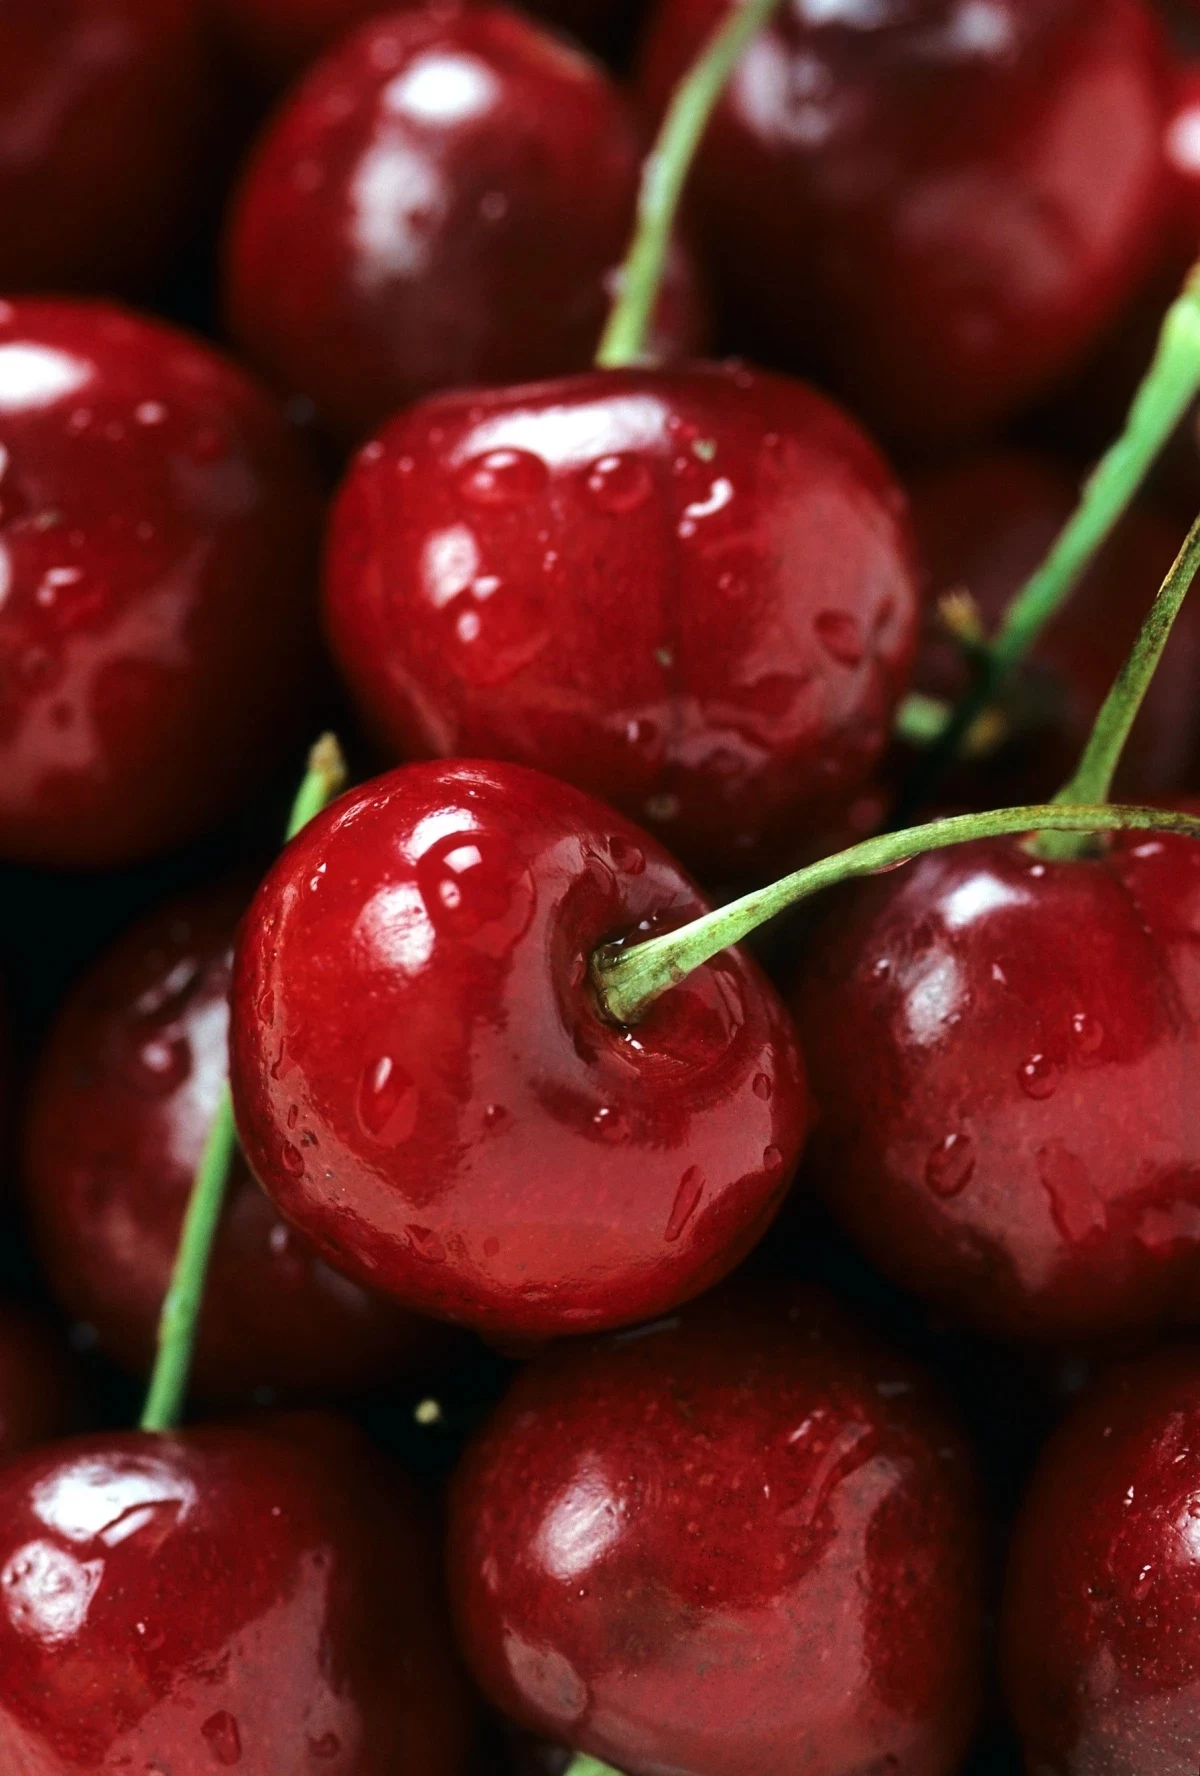 how to remove cherry stains cherries that are washed